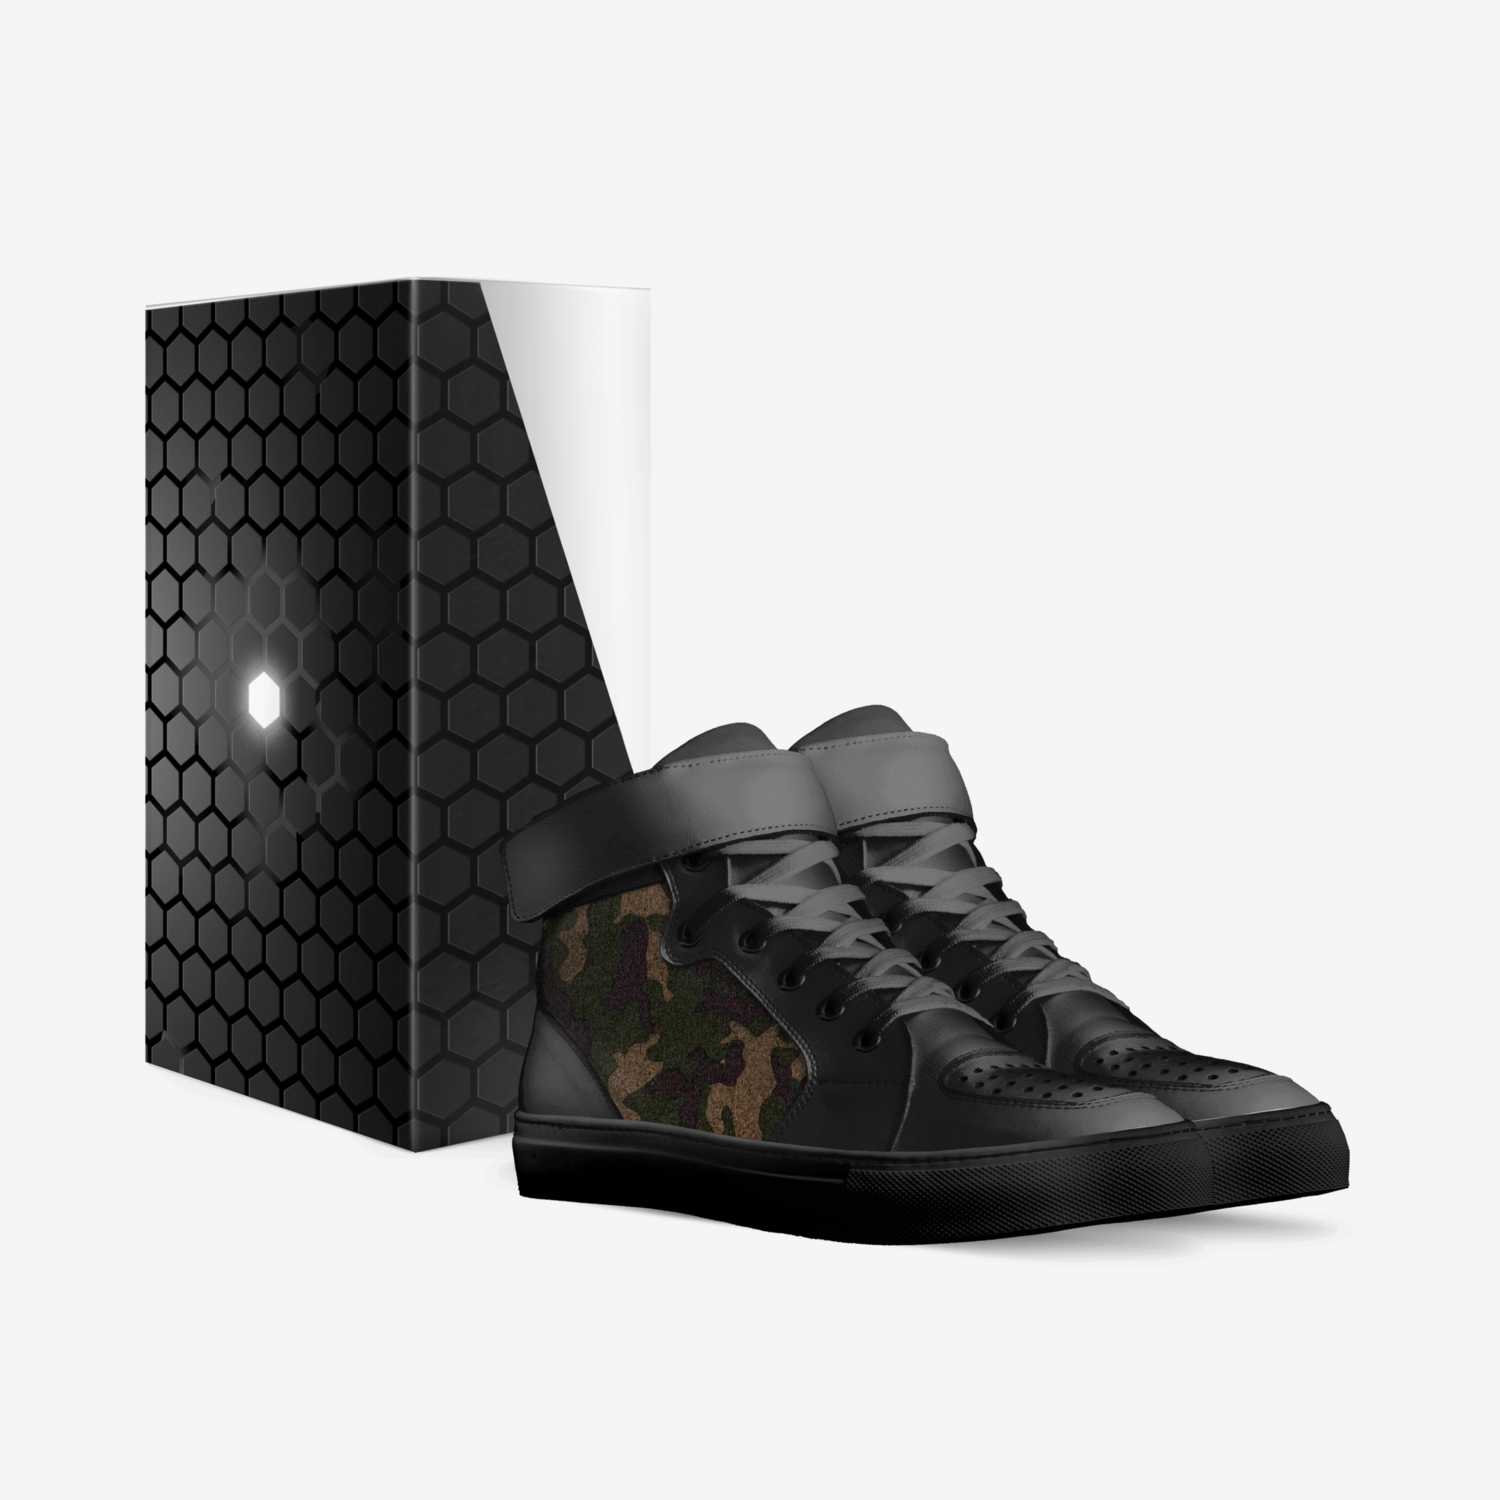 Digtal-Blackout custom made in Italy shoes by Frank Lamar | Box view